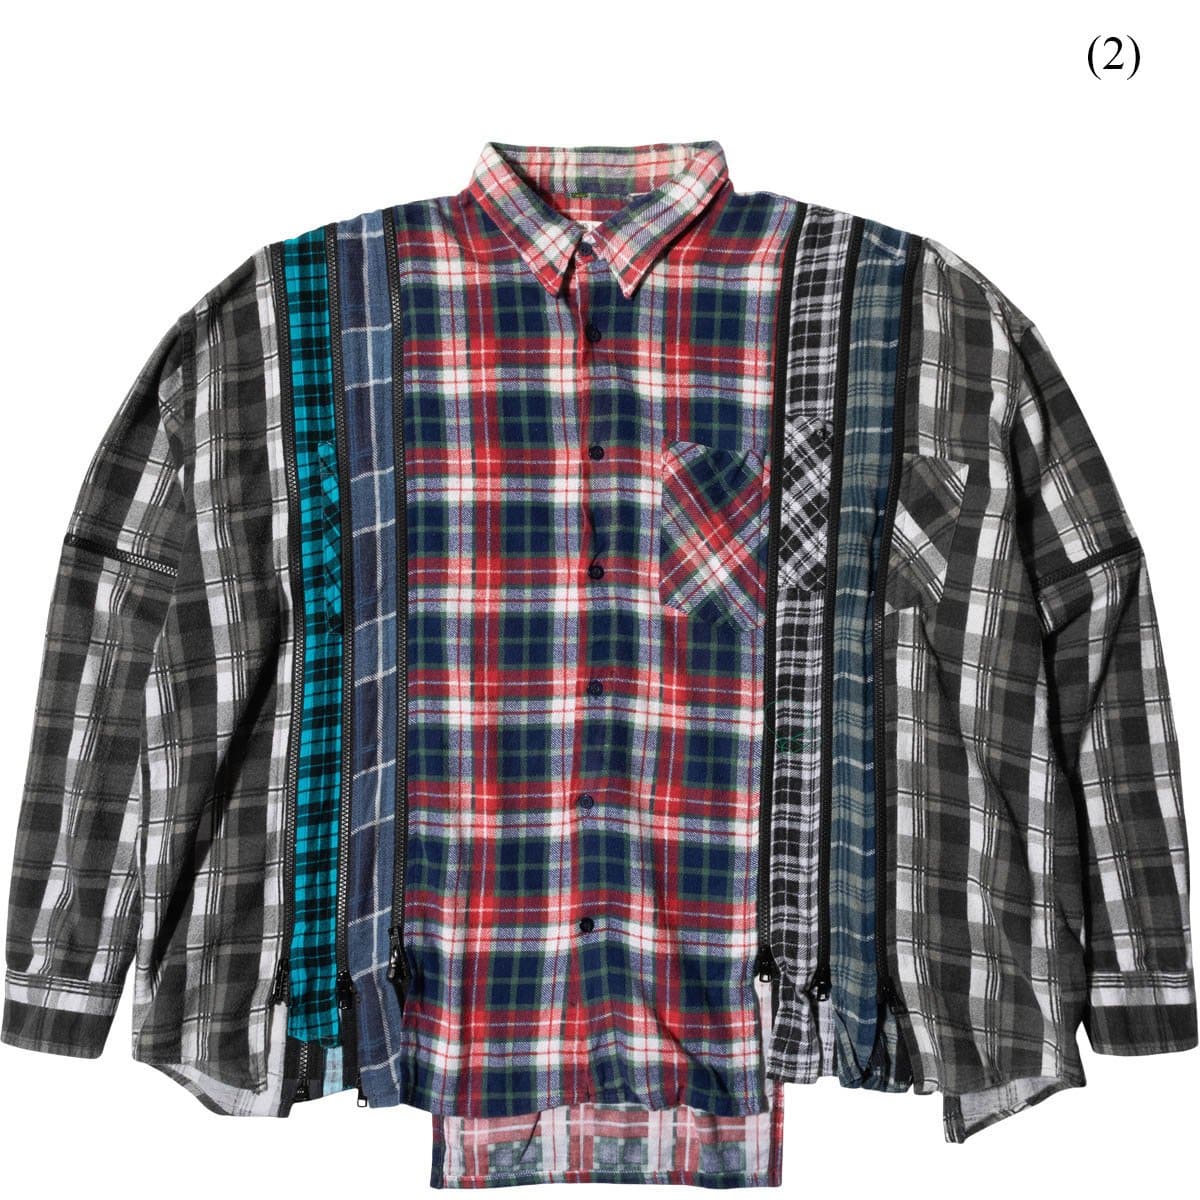 Needles 7 CUTS ZIPPED WIDE FLANNEL SHIRT FW21 (MULTIPLE OPTIONS)